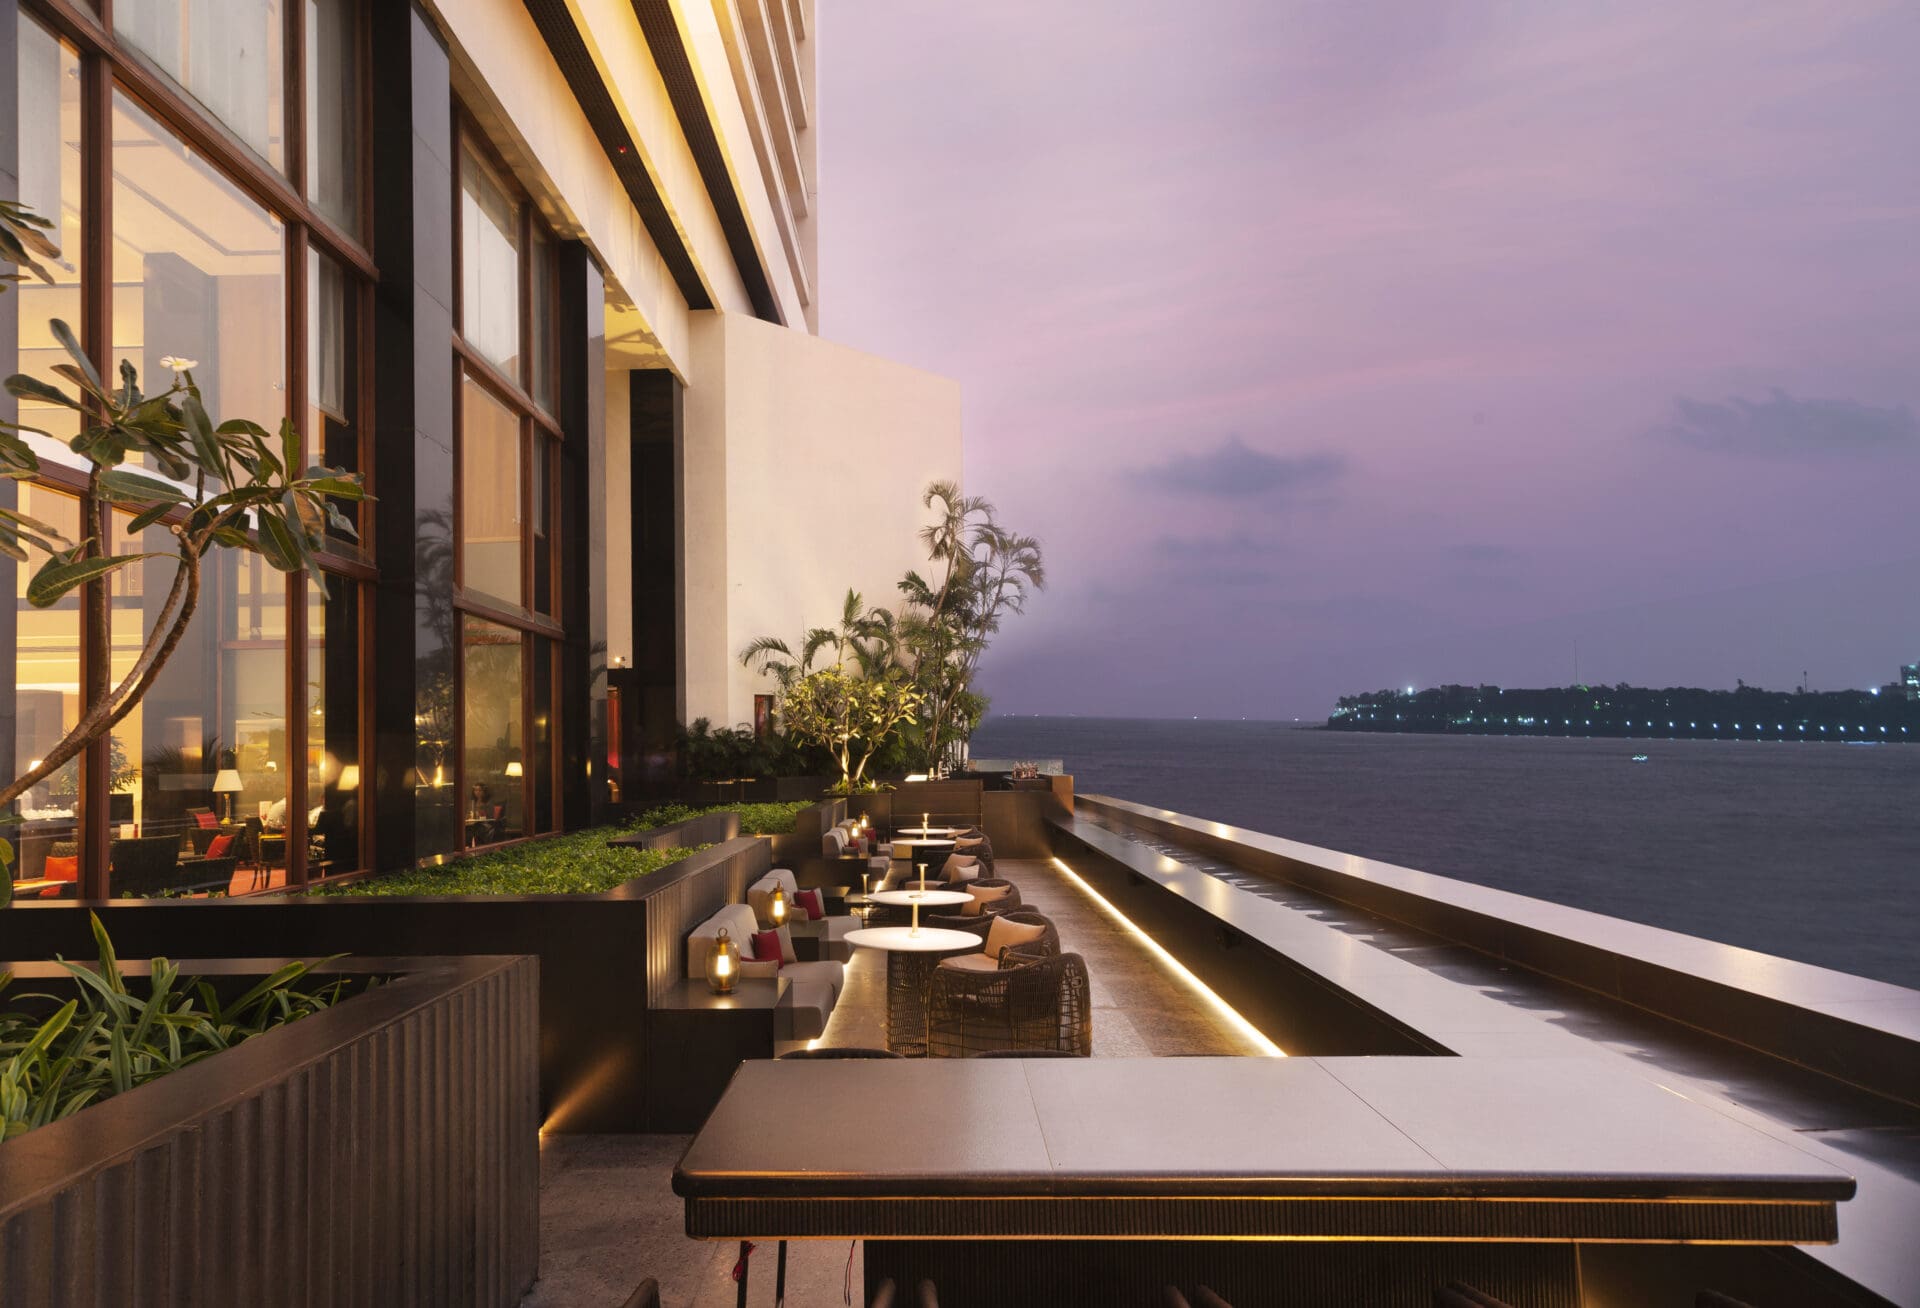 The best hotels in Mumbai | A view of the outdoor seating area at Eau Bar, at The Oberoi hotel in Mumbai.